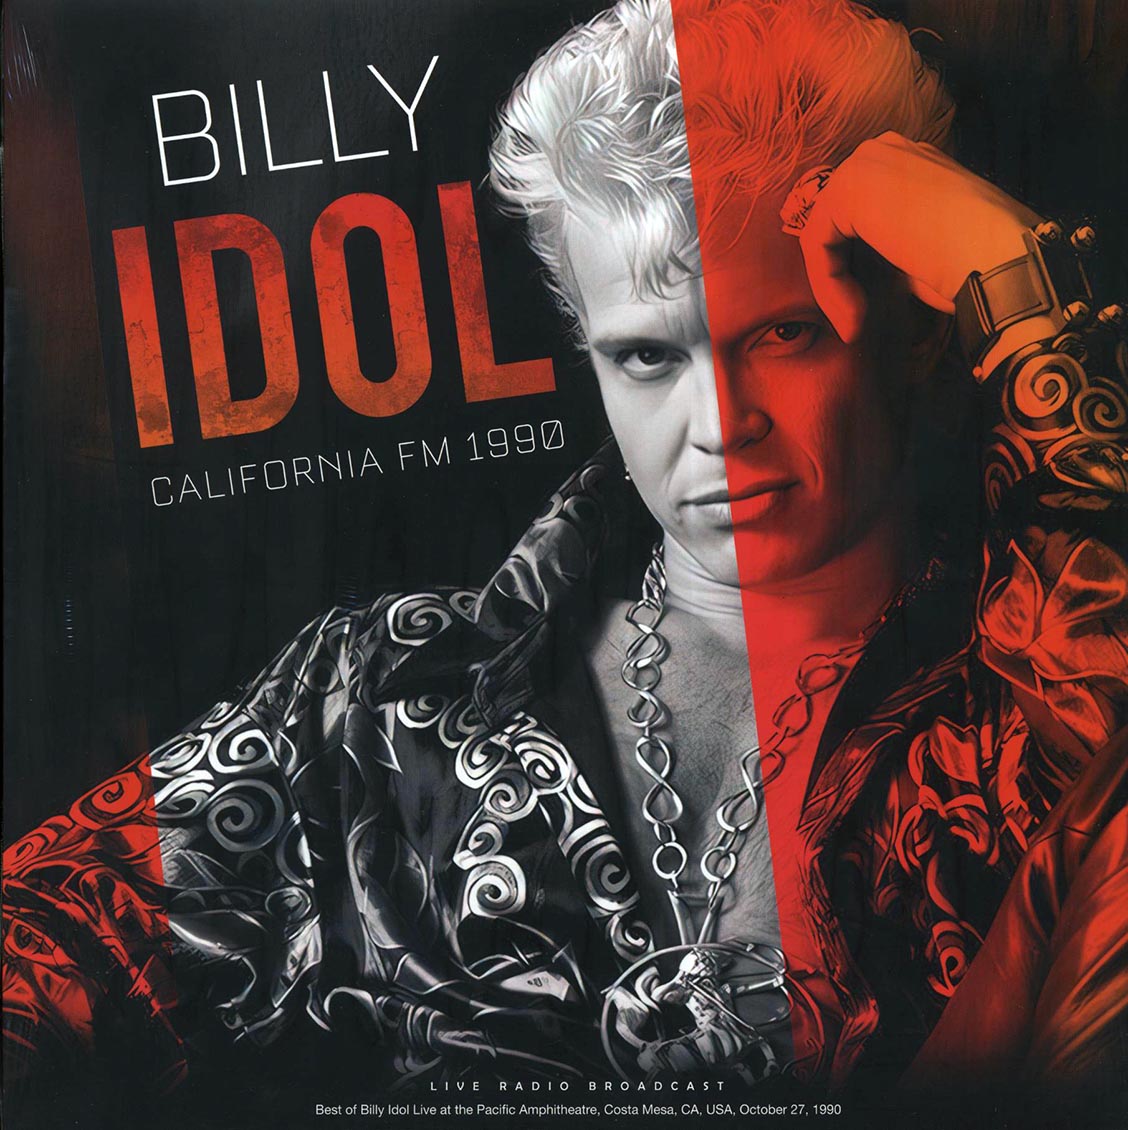 Billy Idol - California FM 1990: Live At The Pacific Amphitheater, Costa Mesa, CA, October 27th, 1990 (180g) - Vinyl LP